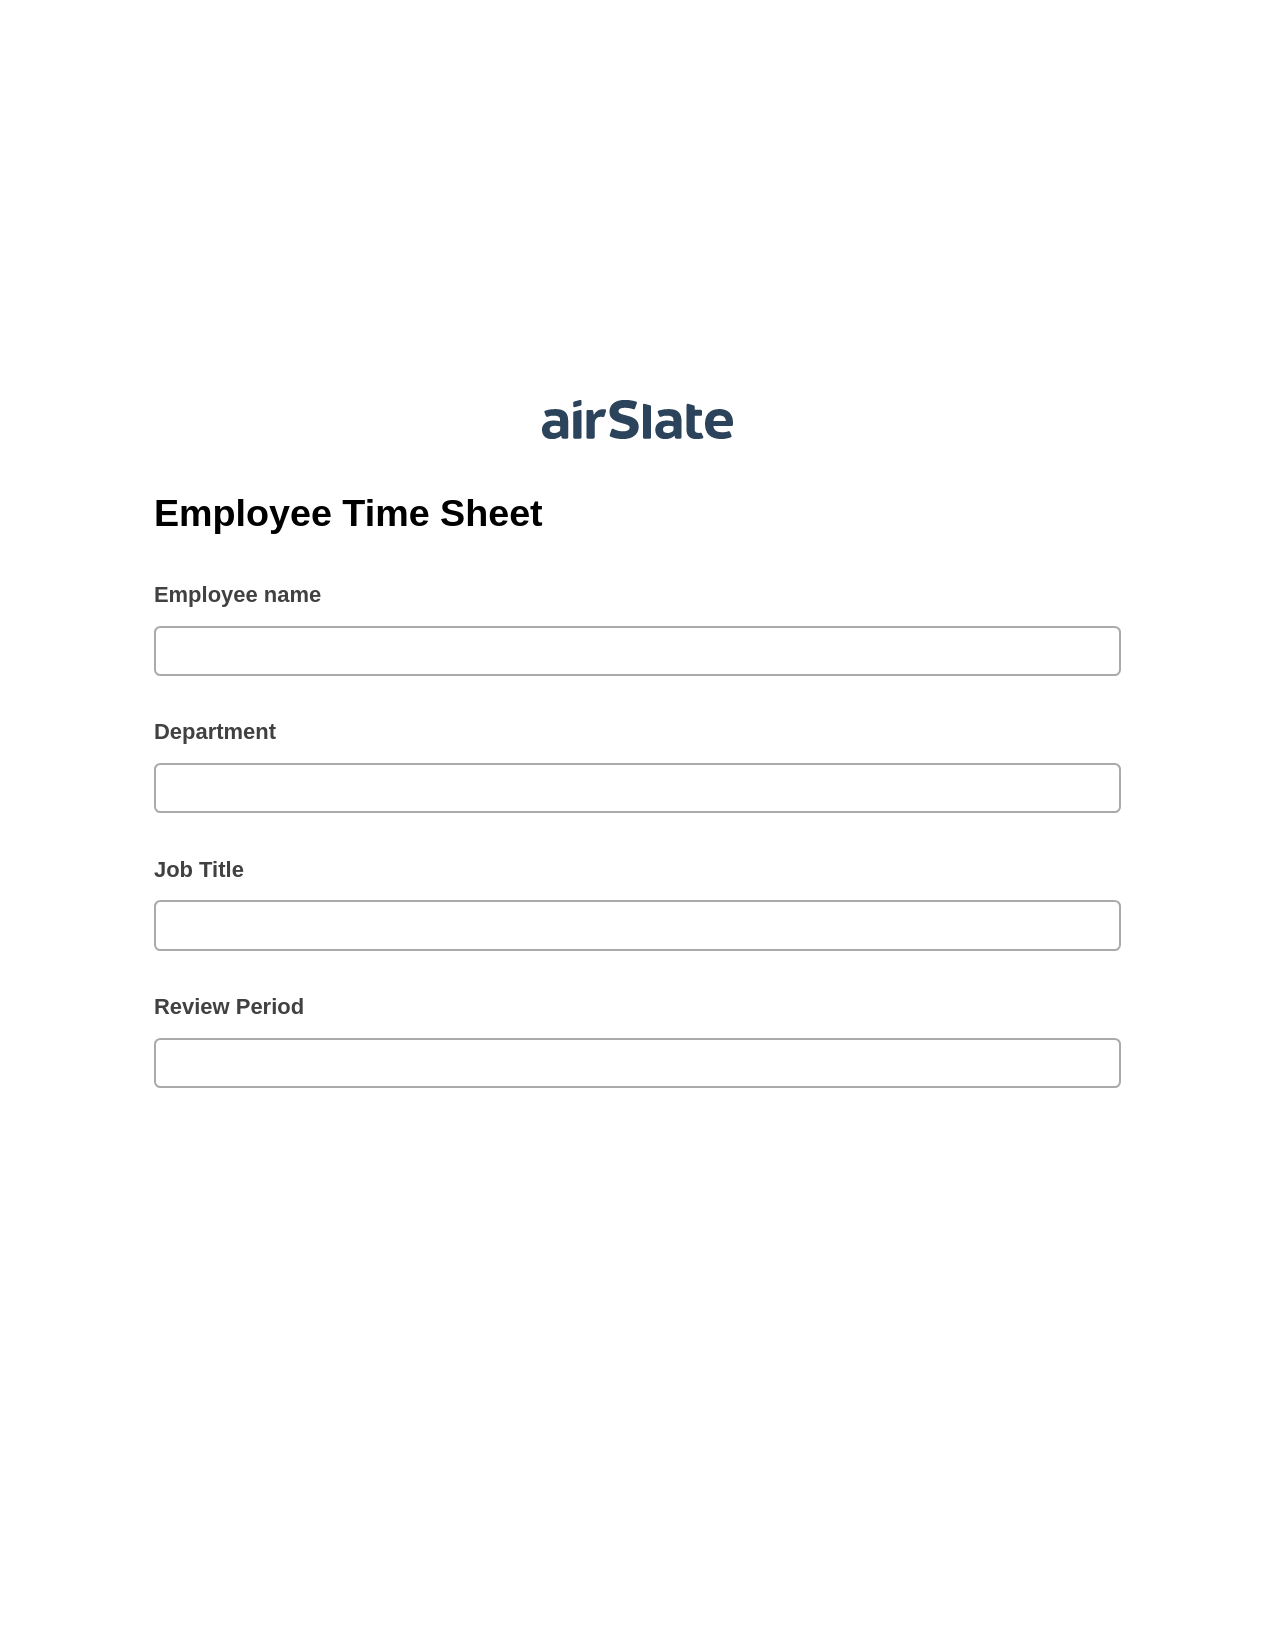 Employee Time Sheet Pre-fill Dropdowns from Airtable, Create slate addon, Archive to SharePoint Folder Bot